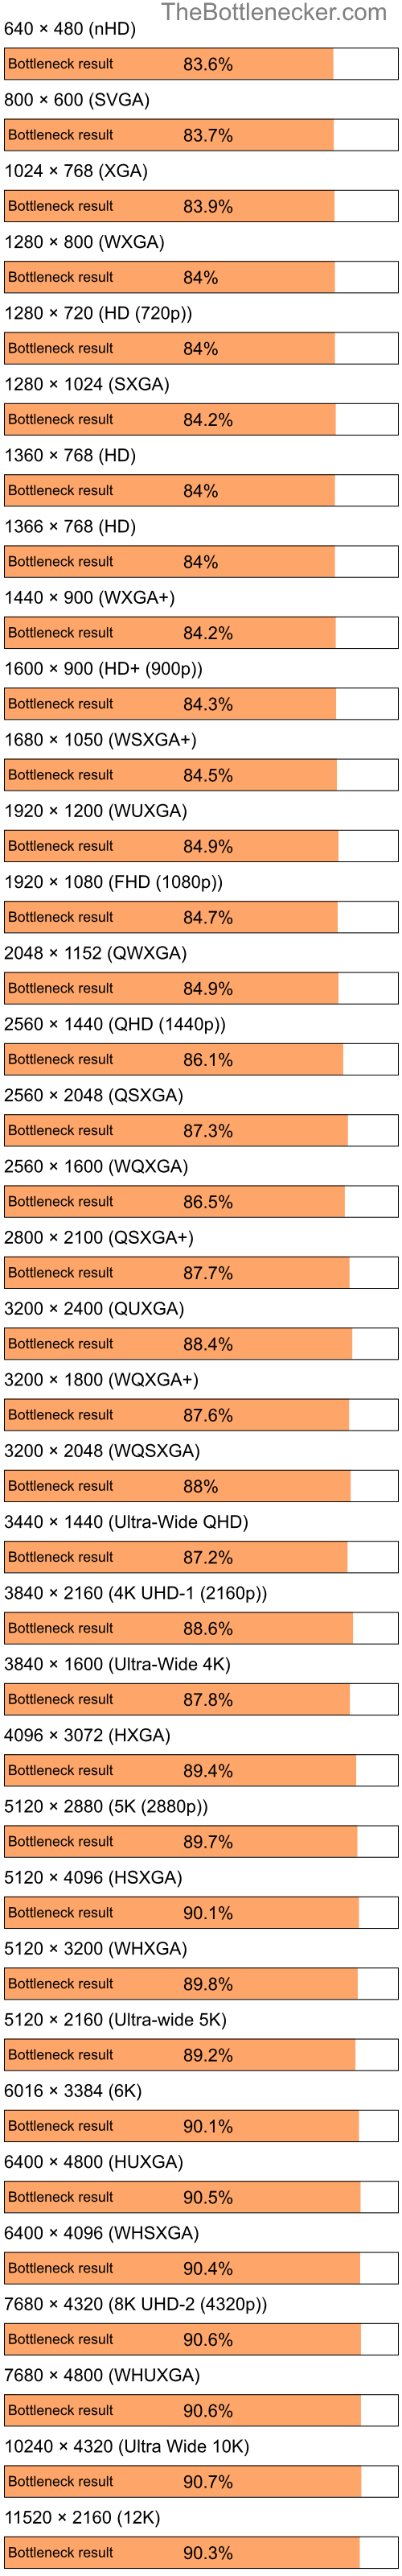 Bottleneck results by resolution for Intel Pentium 4 and NVIDIA GeForce 6100 in Graphic Card Intense Tasks